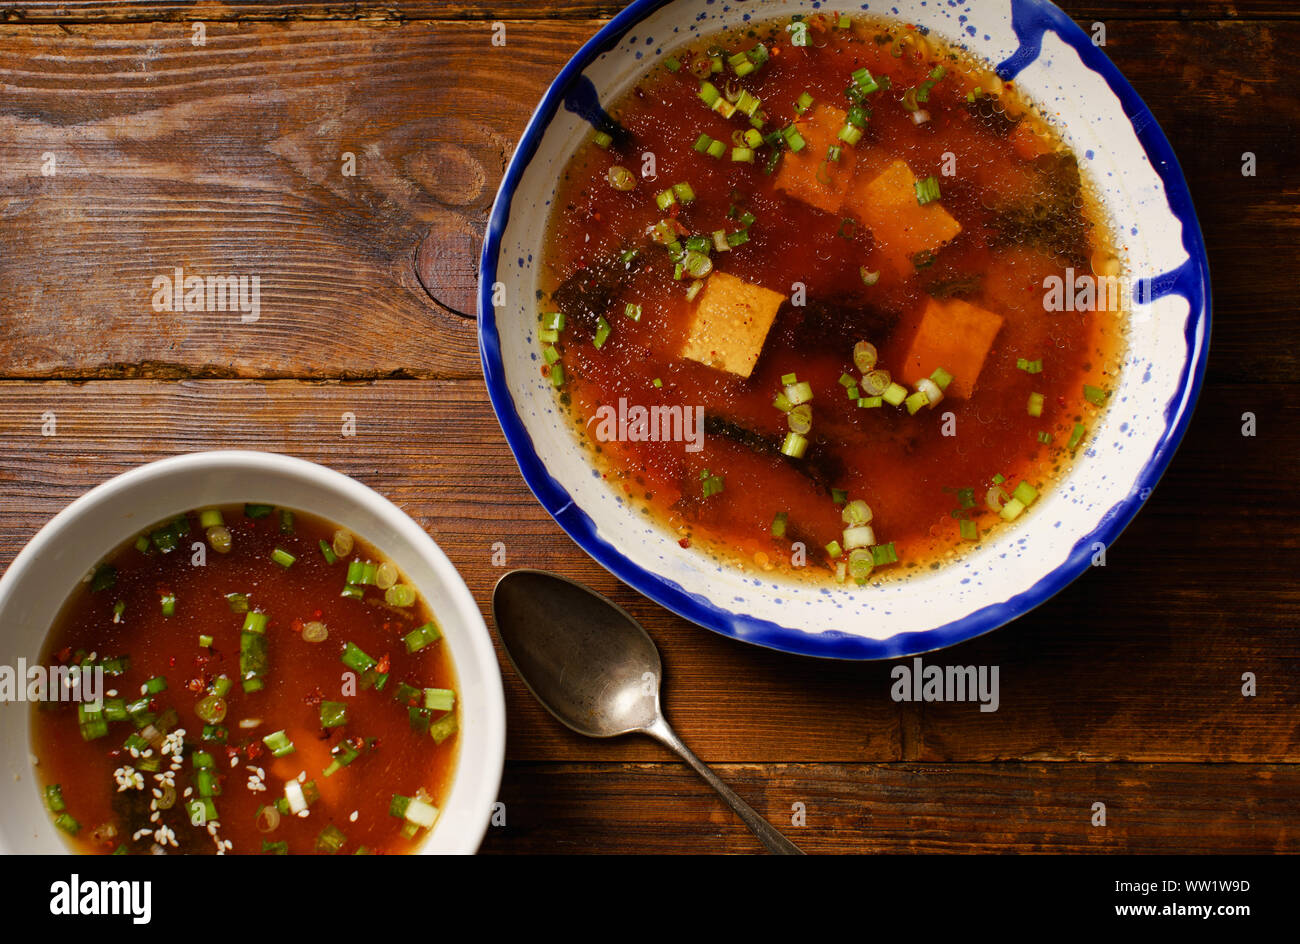 Japanese miso soup with tofu, wakame seaweed, spring onions and pepper flakes Stock Photo